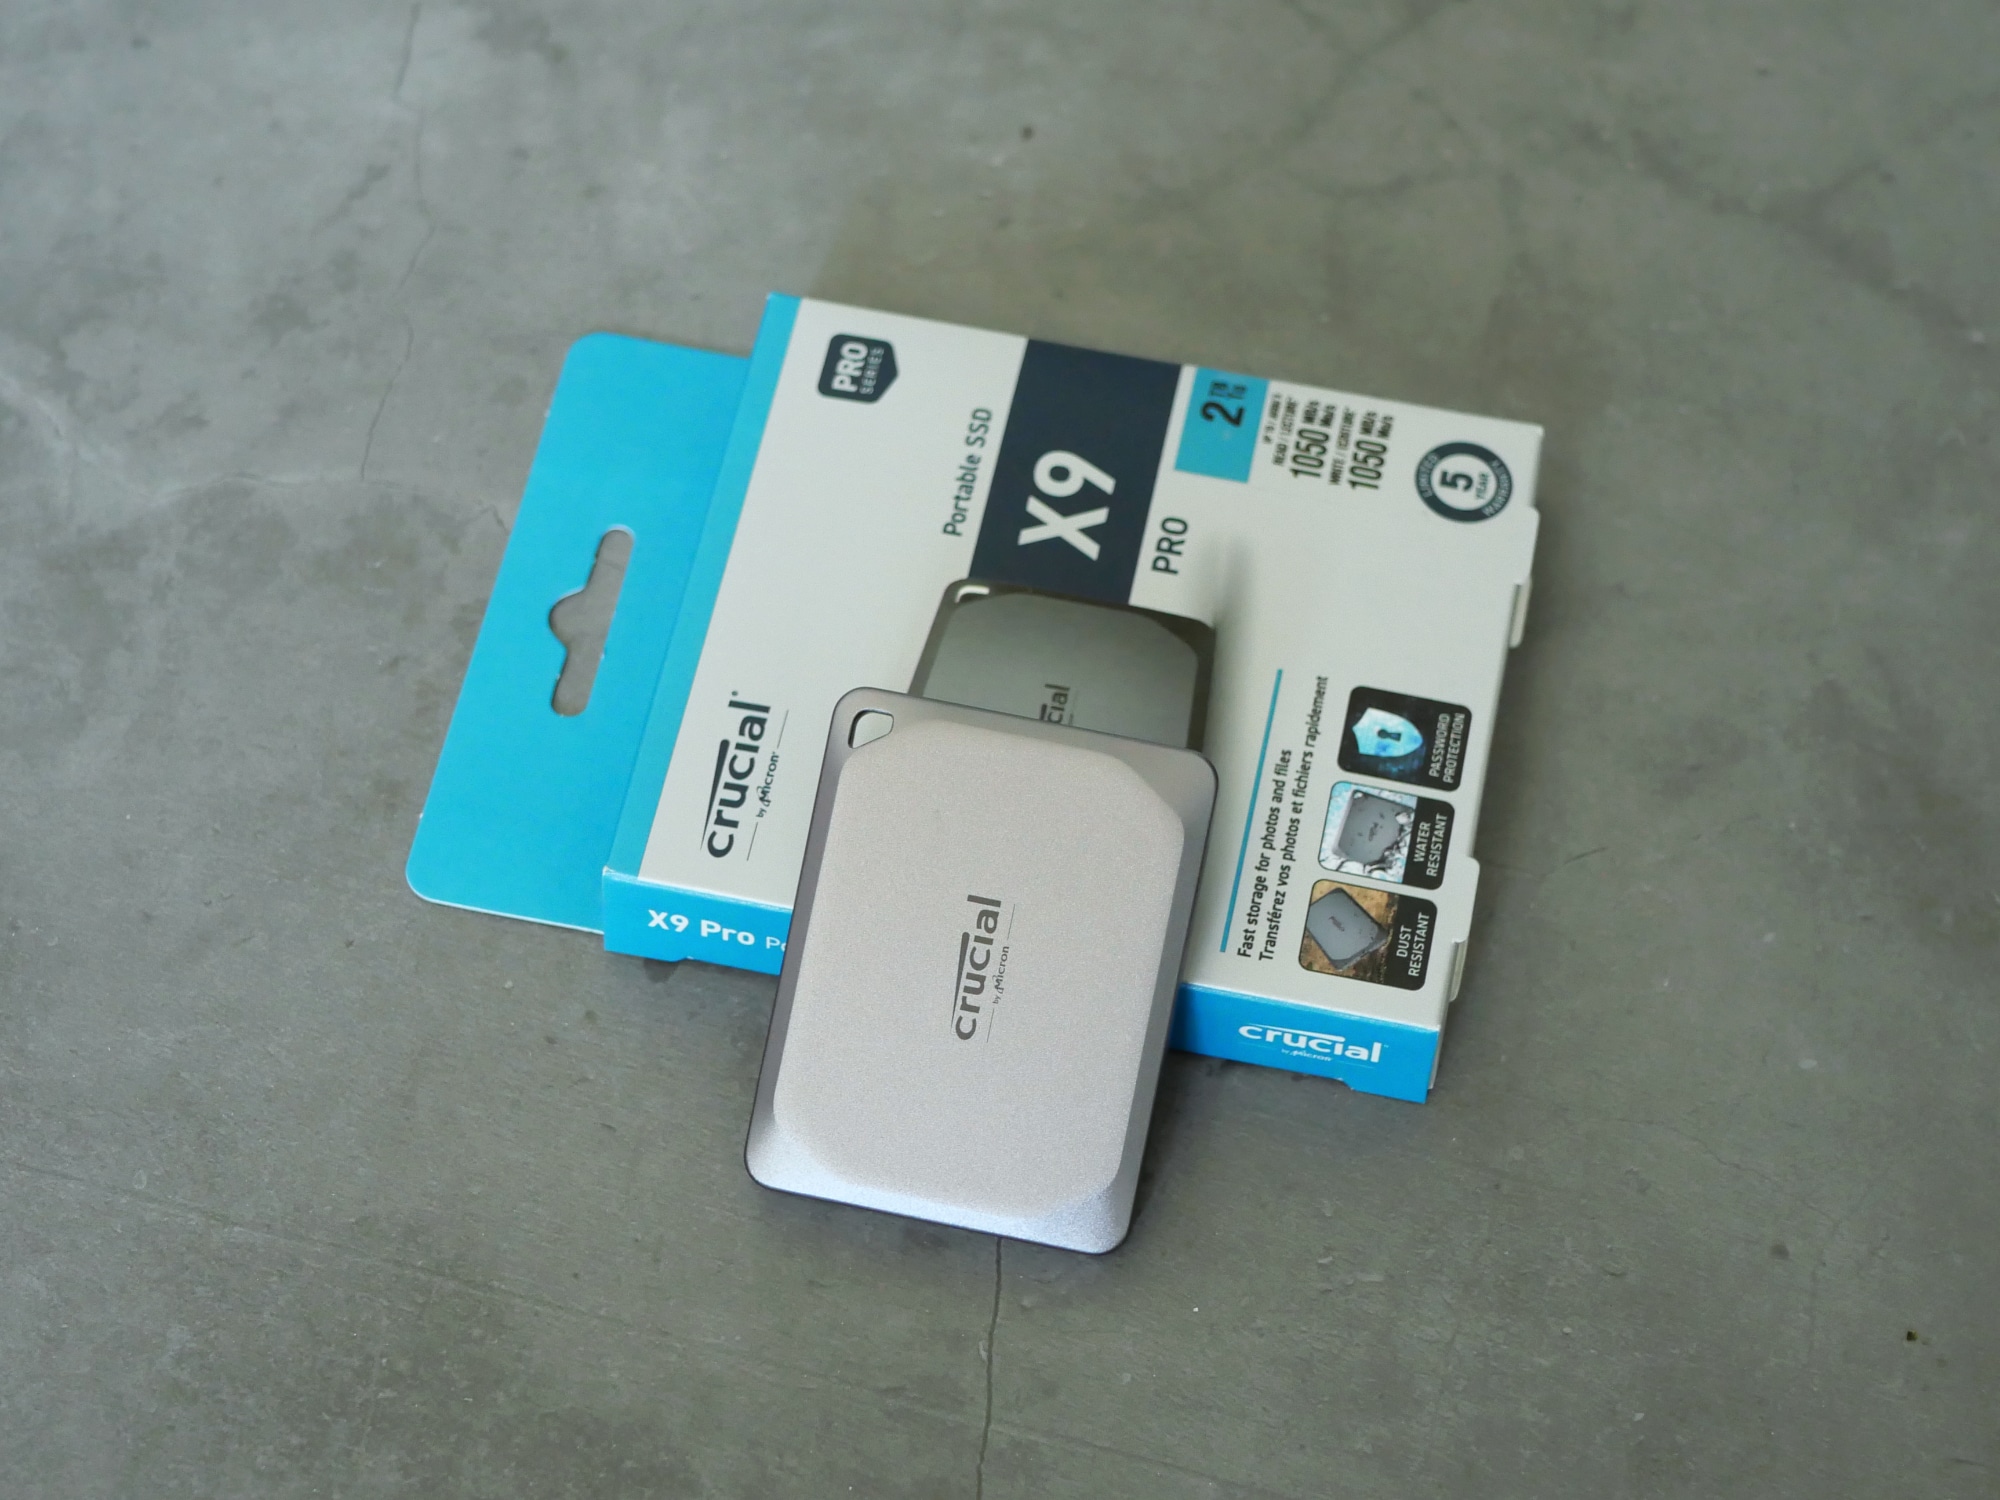 Crucial X9 Pro review - Good and affordable external SSD